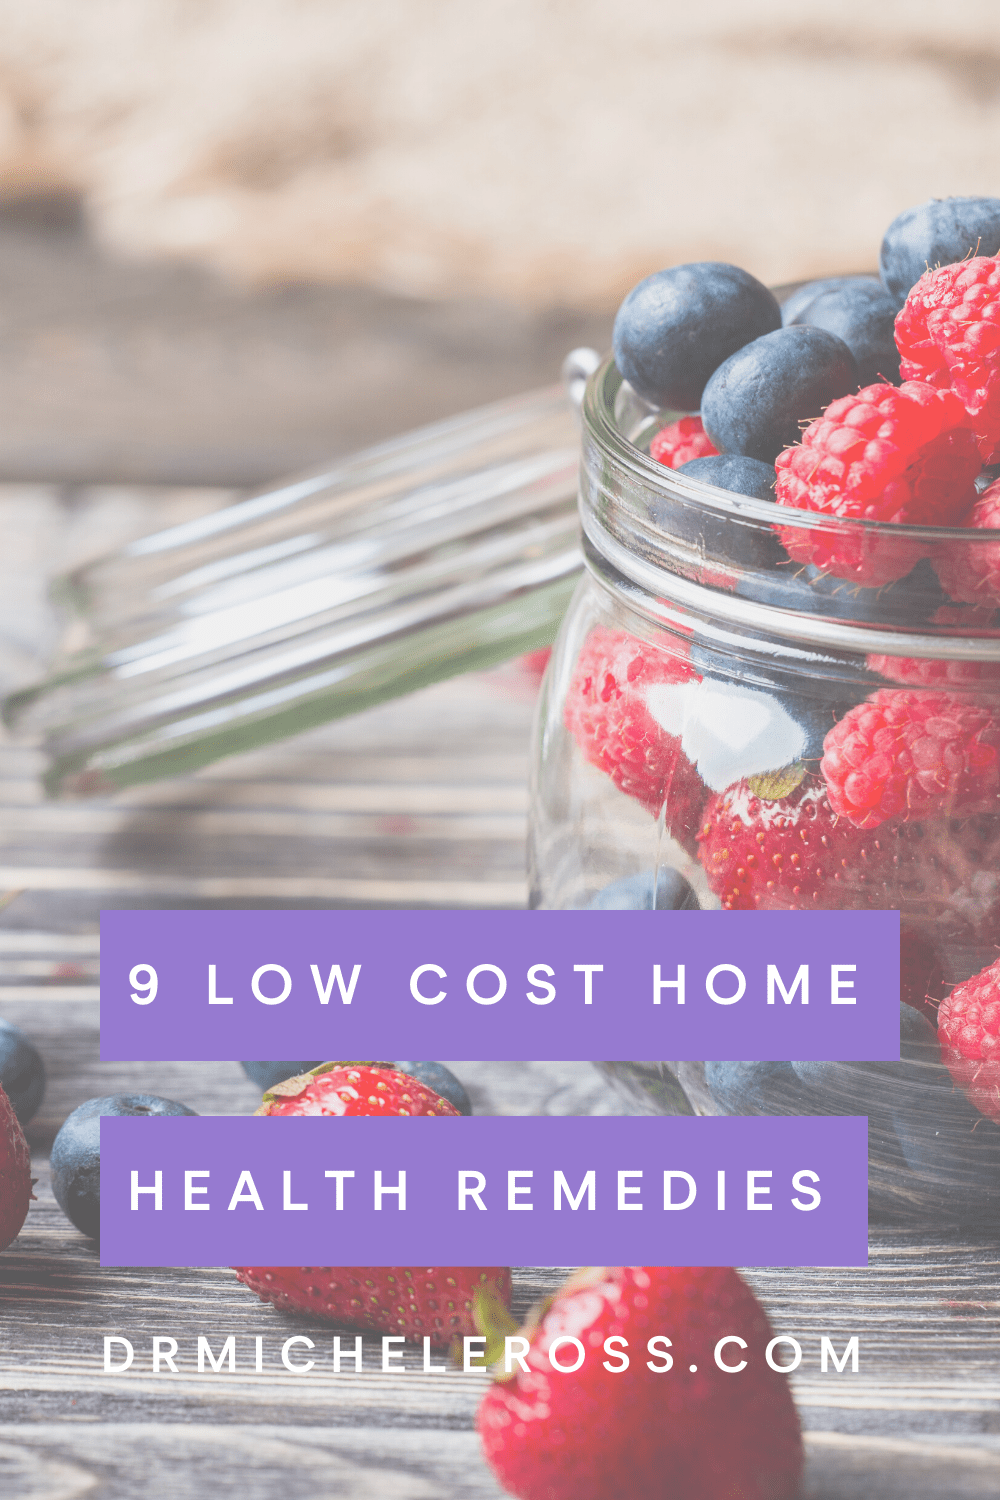 9 Low Cost Home Remedies For Health Issues